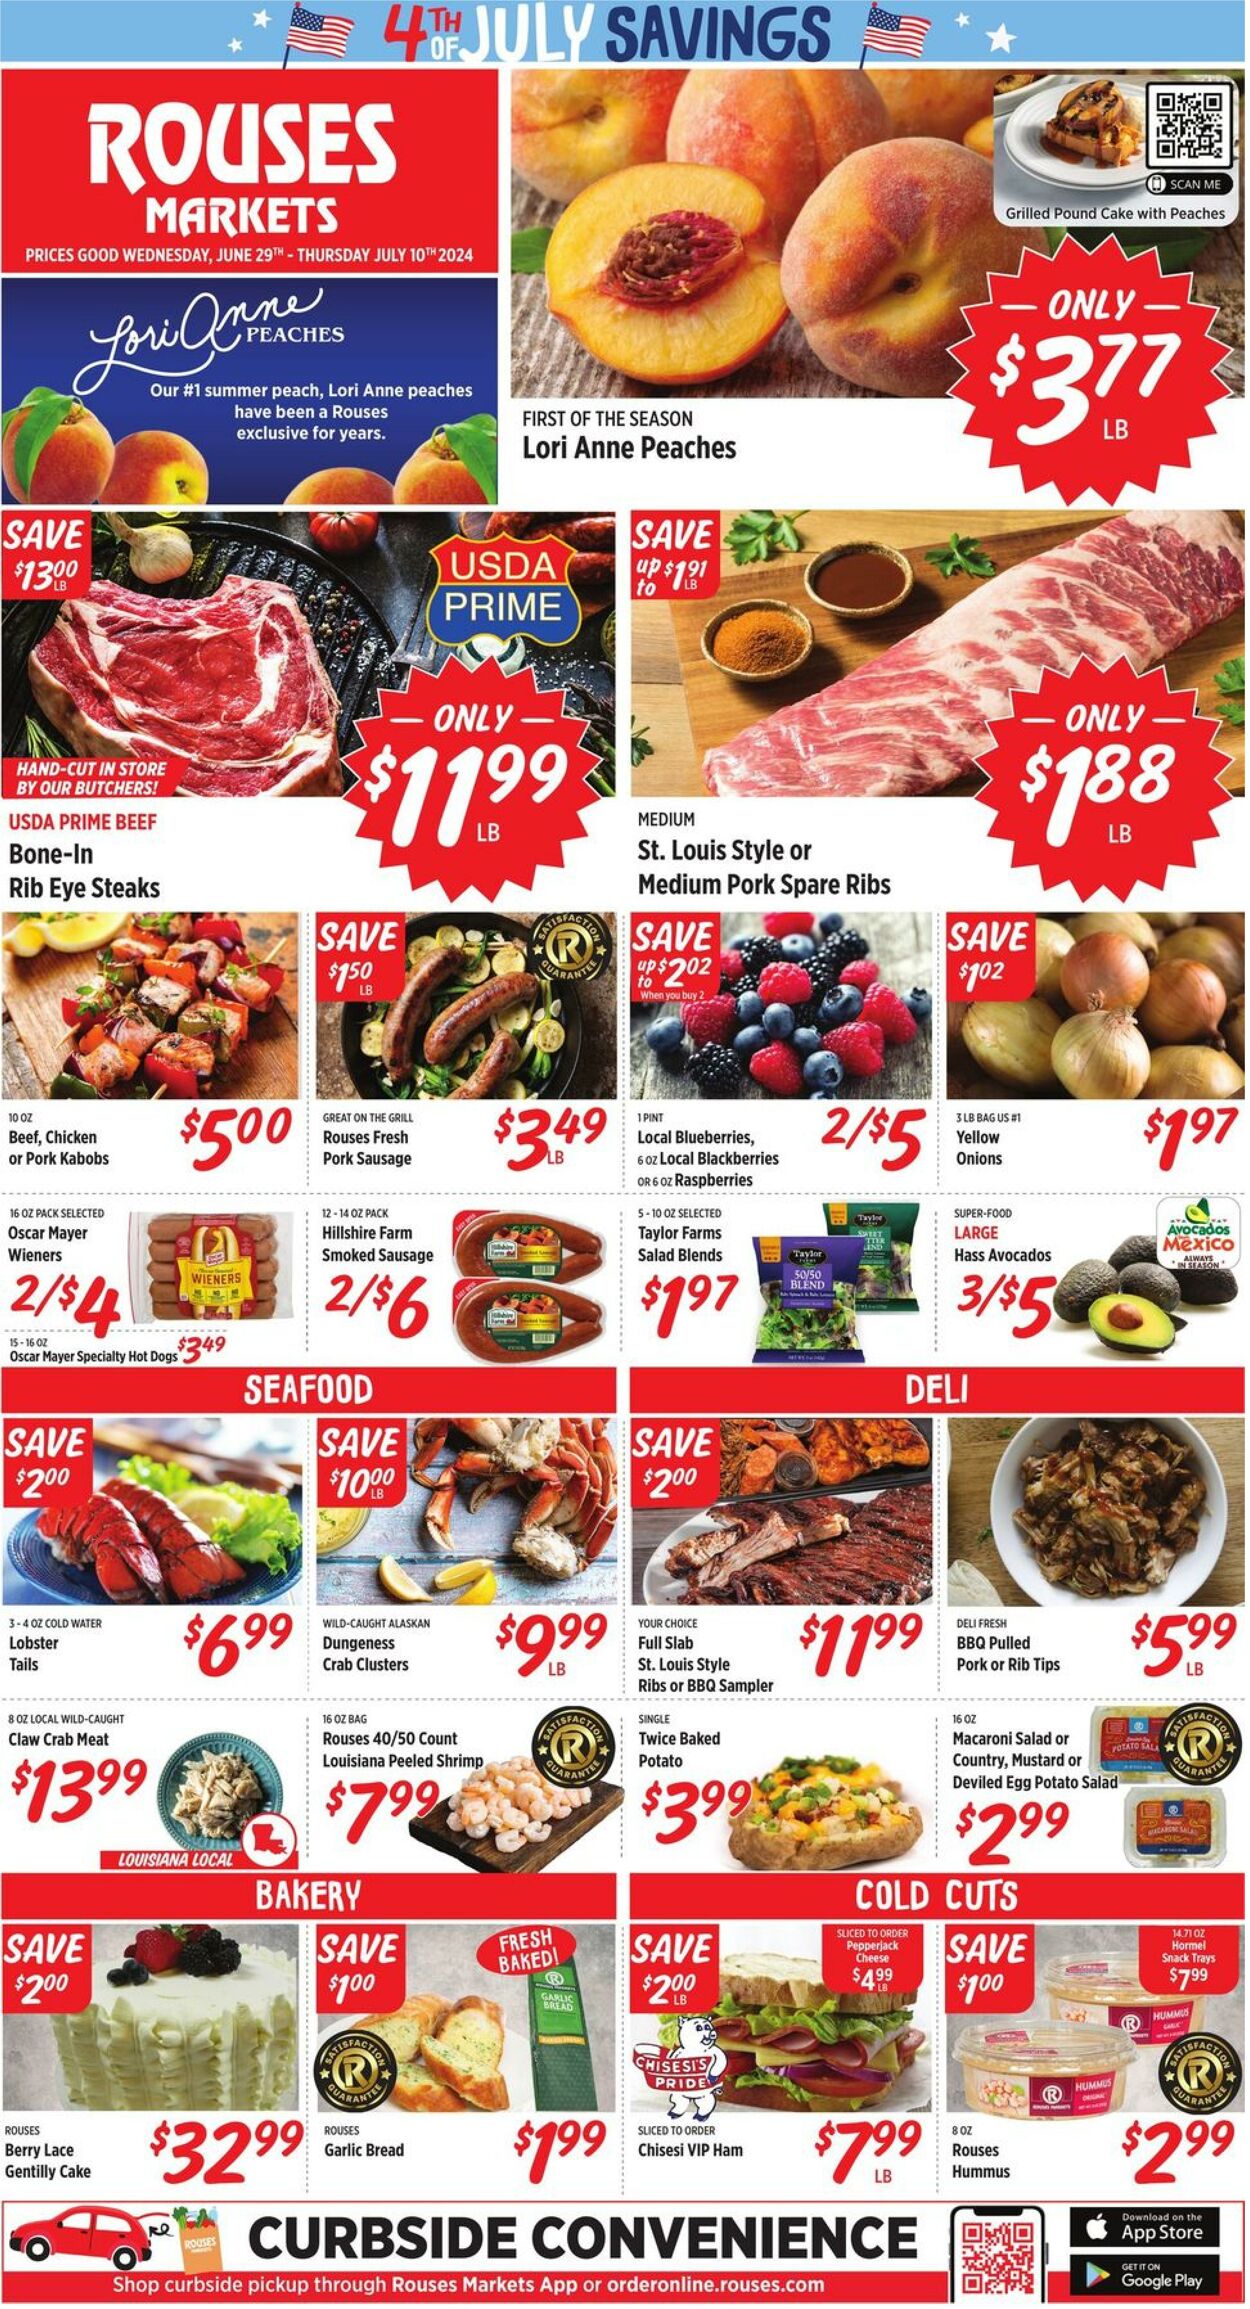 Rouses Promotional weekly ads